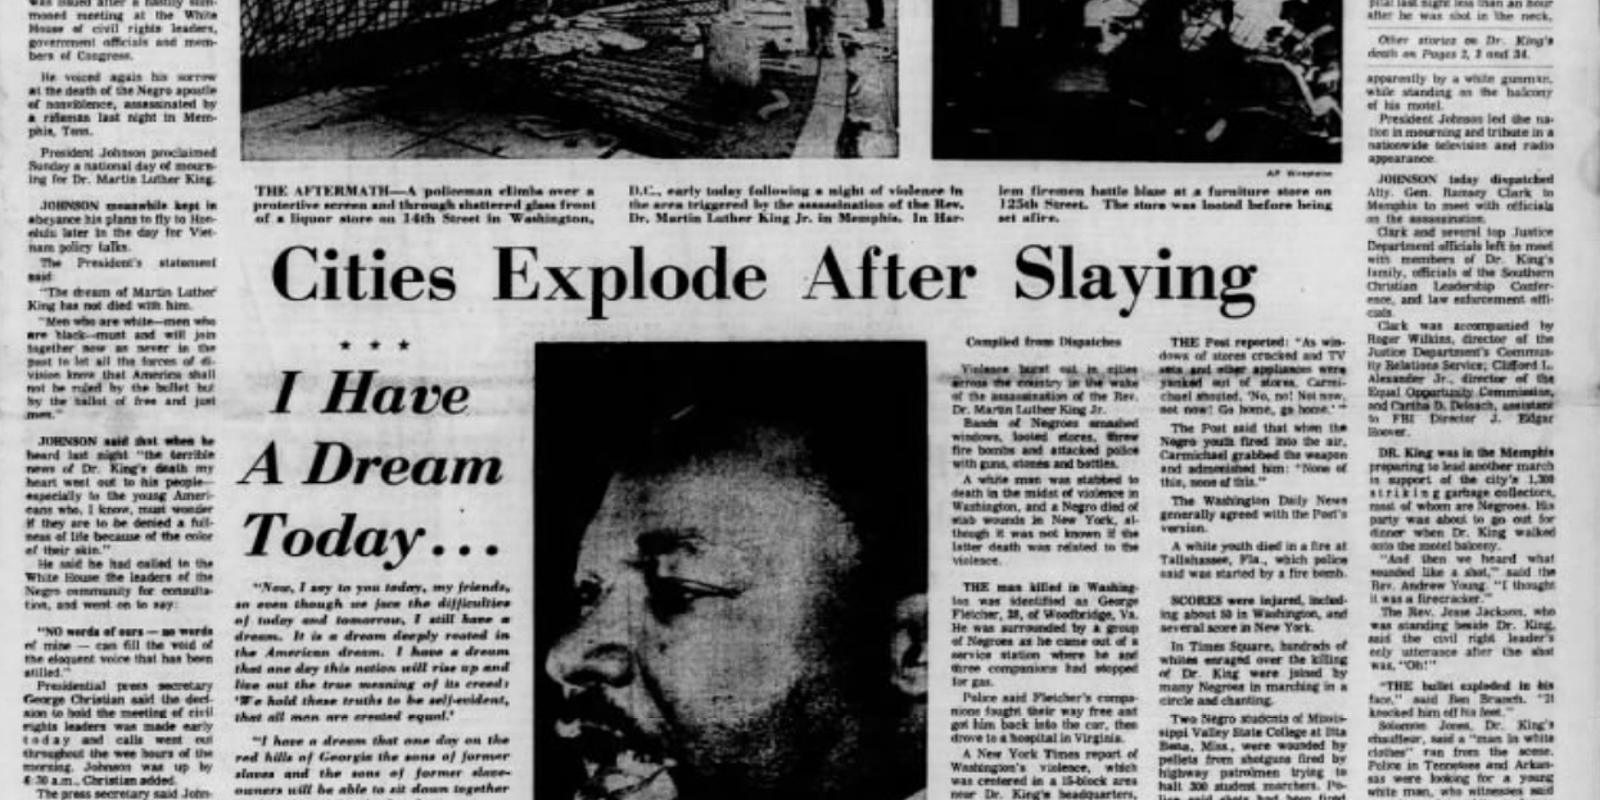 Wilmington Riots 1968: Cities explode after King slaying